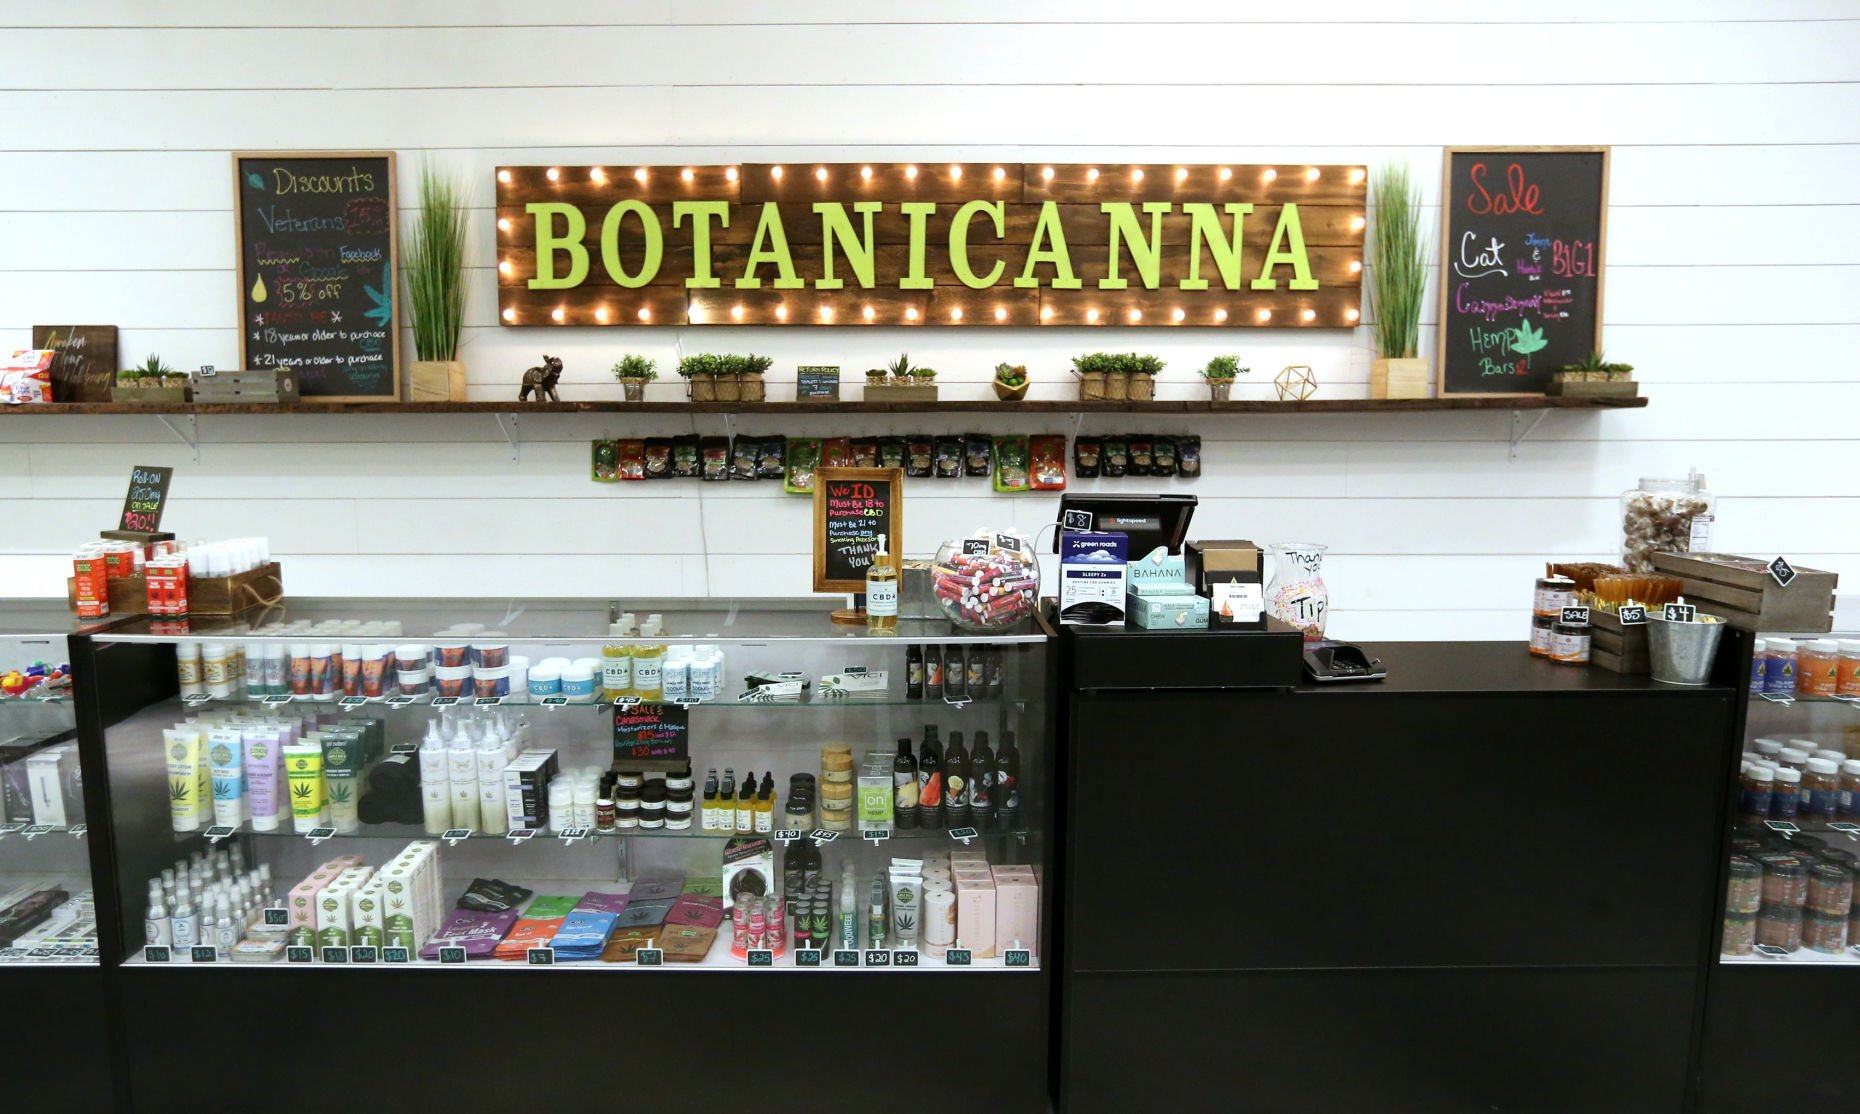 Botanicanna is located in Kennedy Mall in Dubuque.    PHOTO CREDIT: JESSICA REILLY